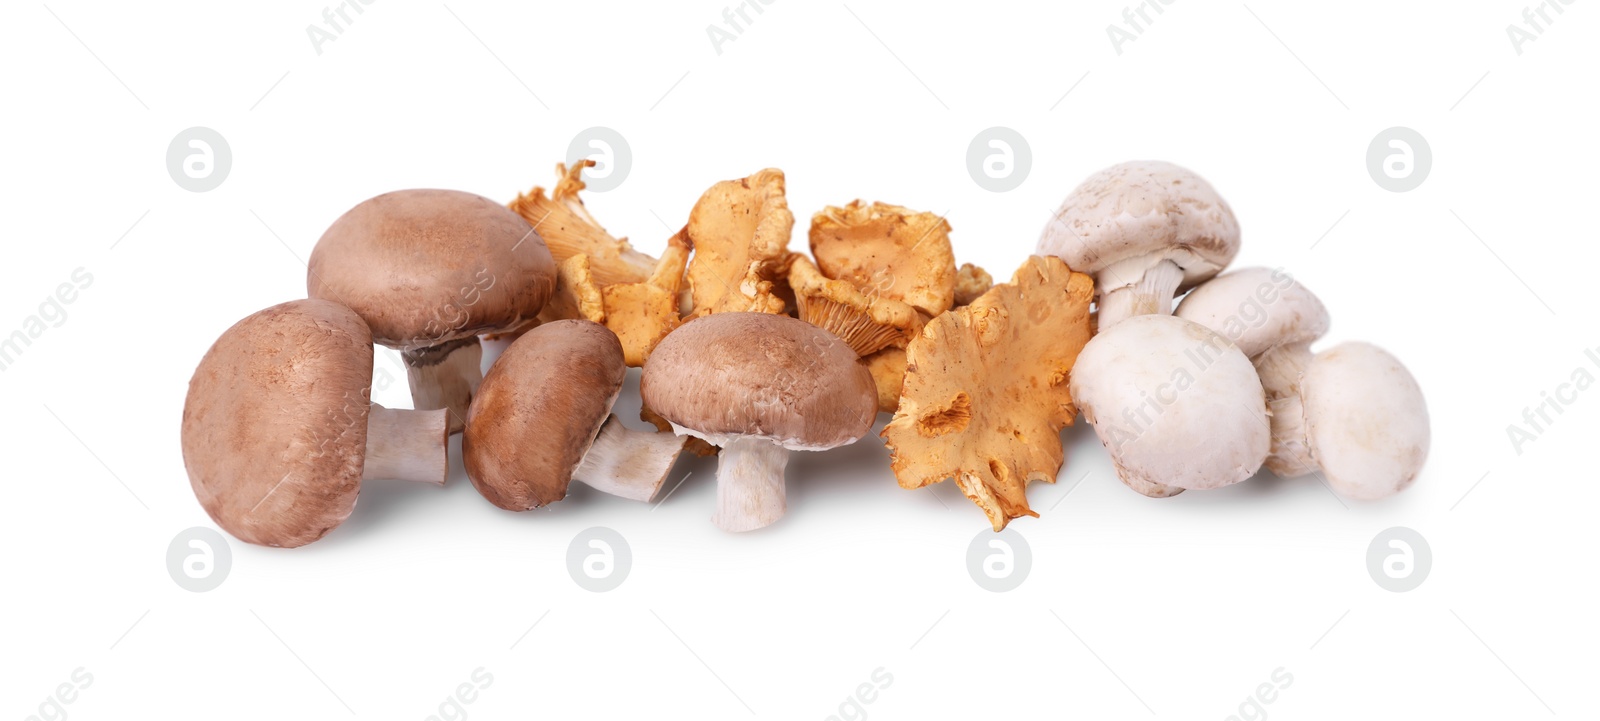 Photo of Pile of different mushrooms isolated on white